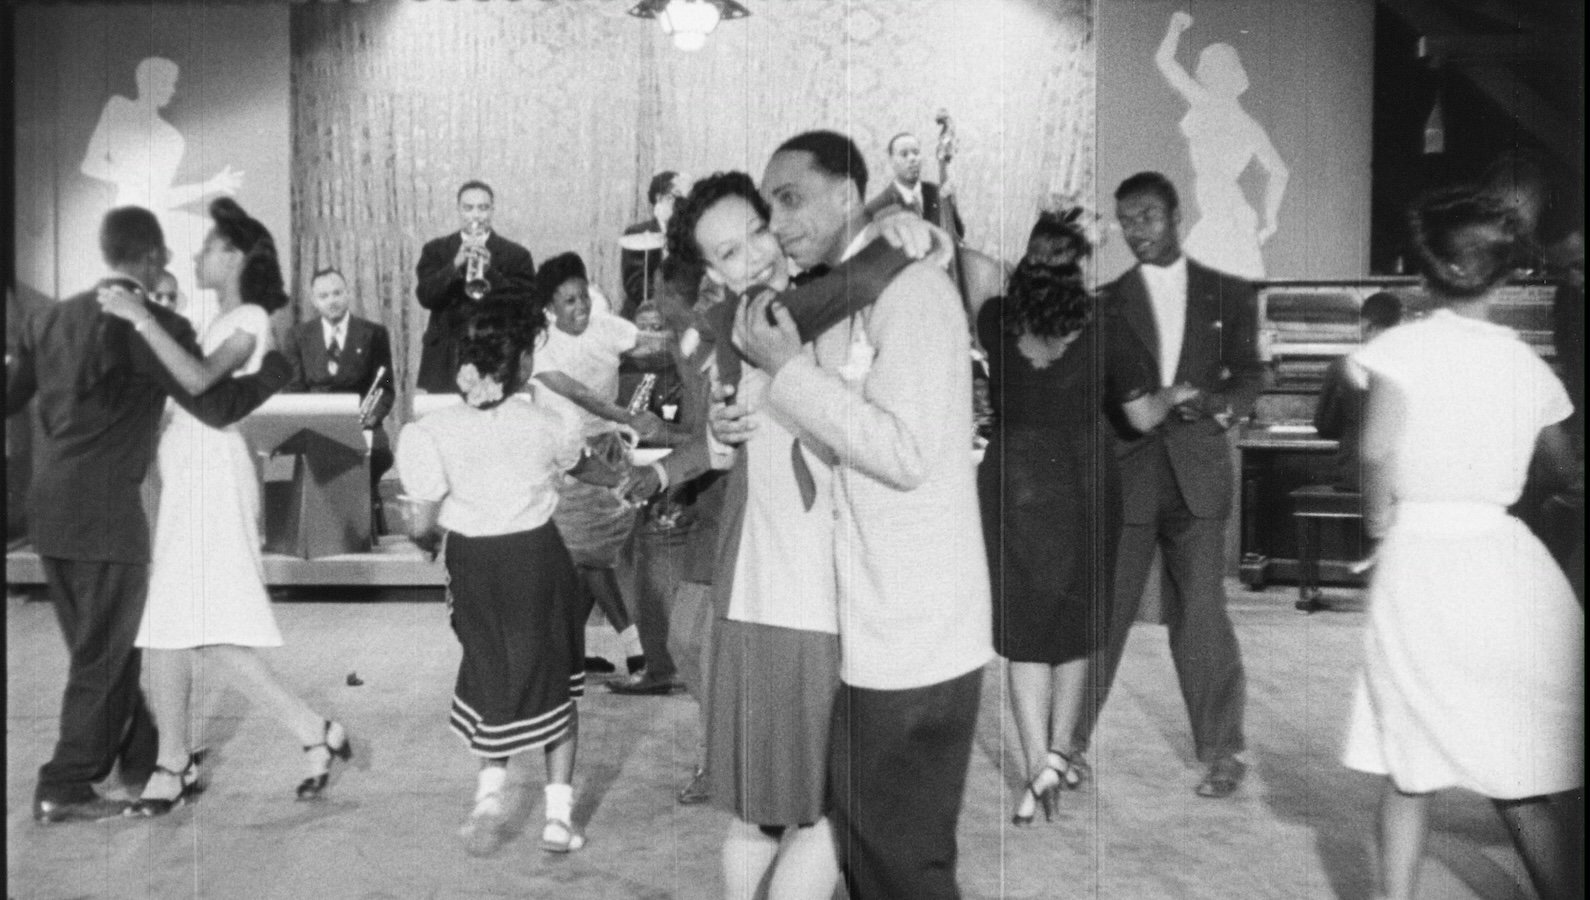 An African American woman and man dance together cheek to cheek amidst other dancers at a juke joint in this black and white image from the 1940s.